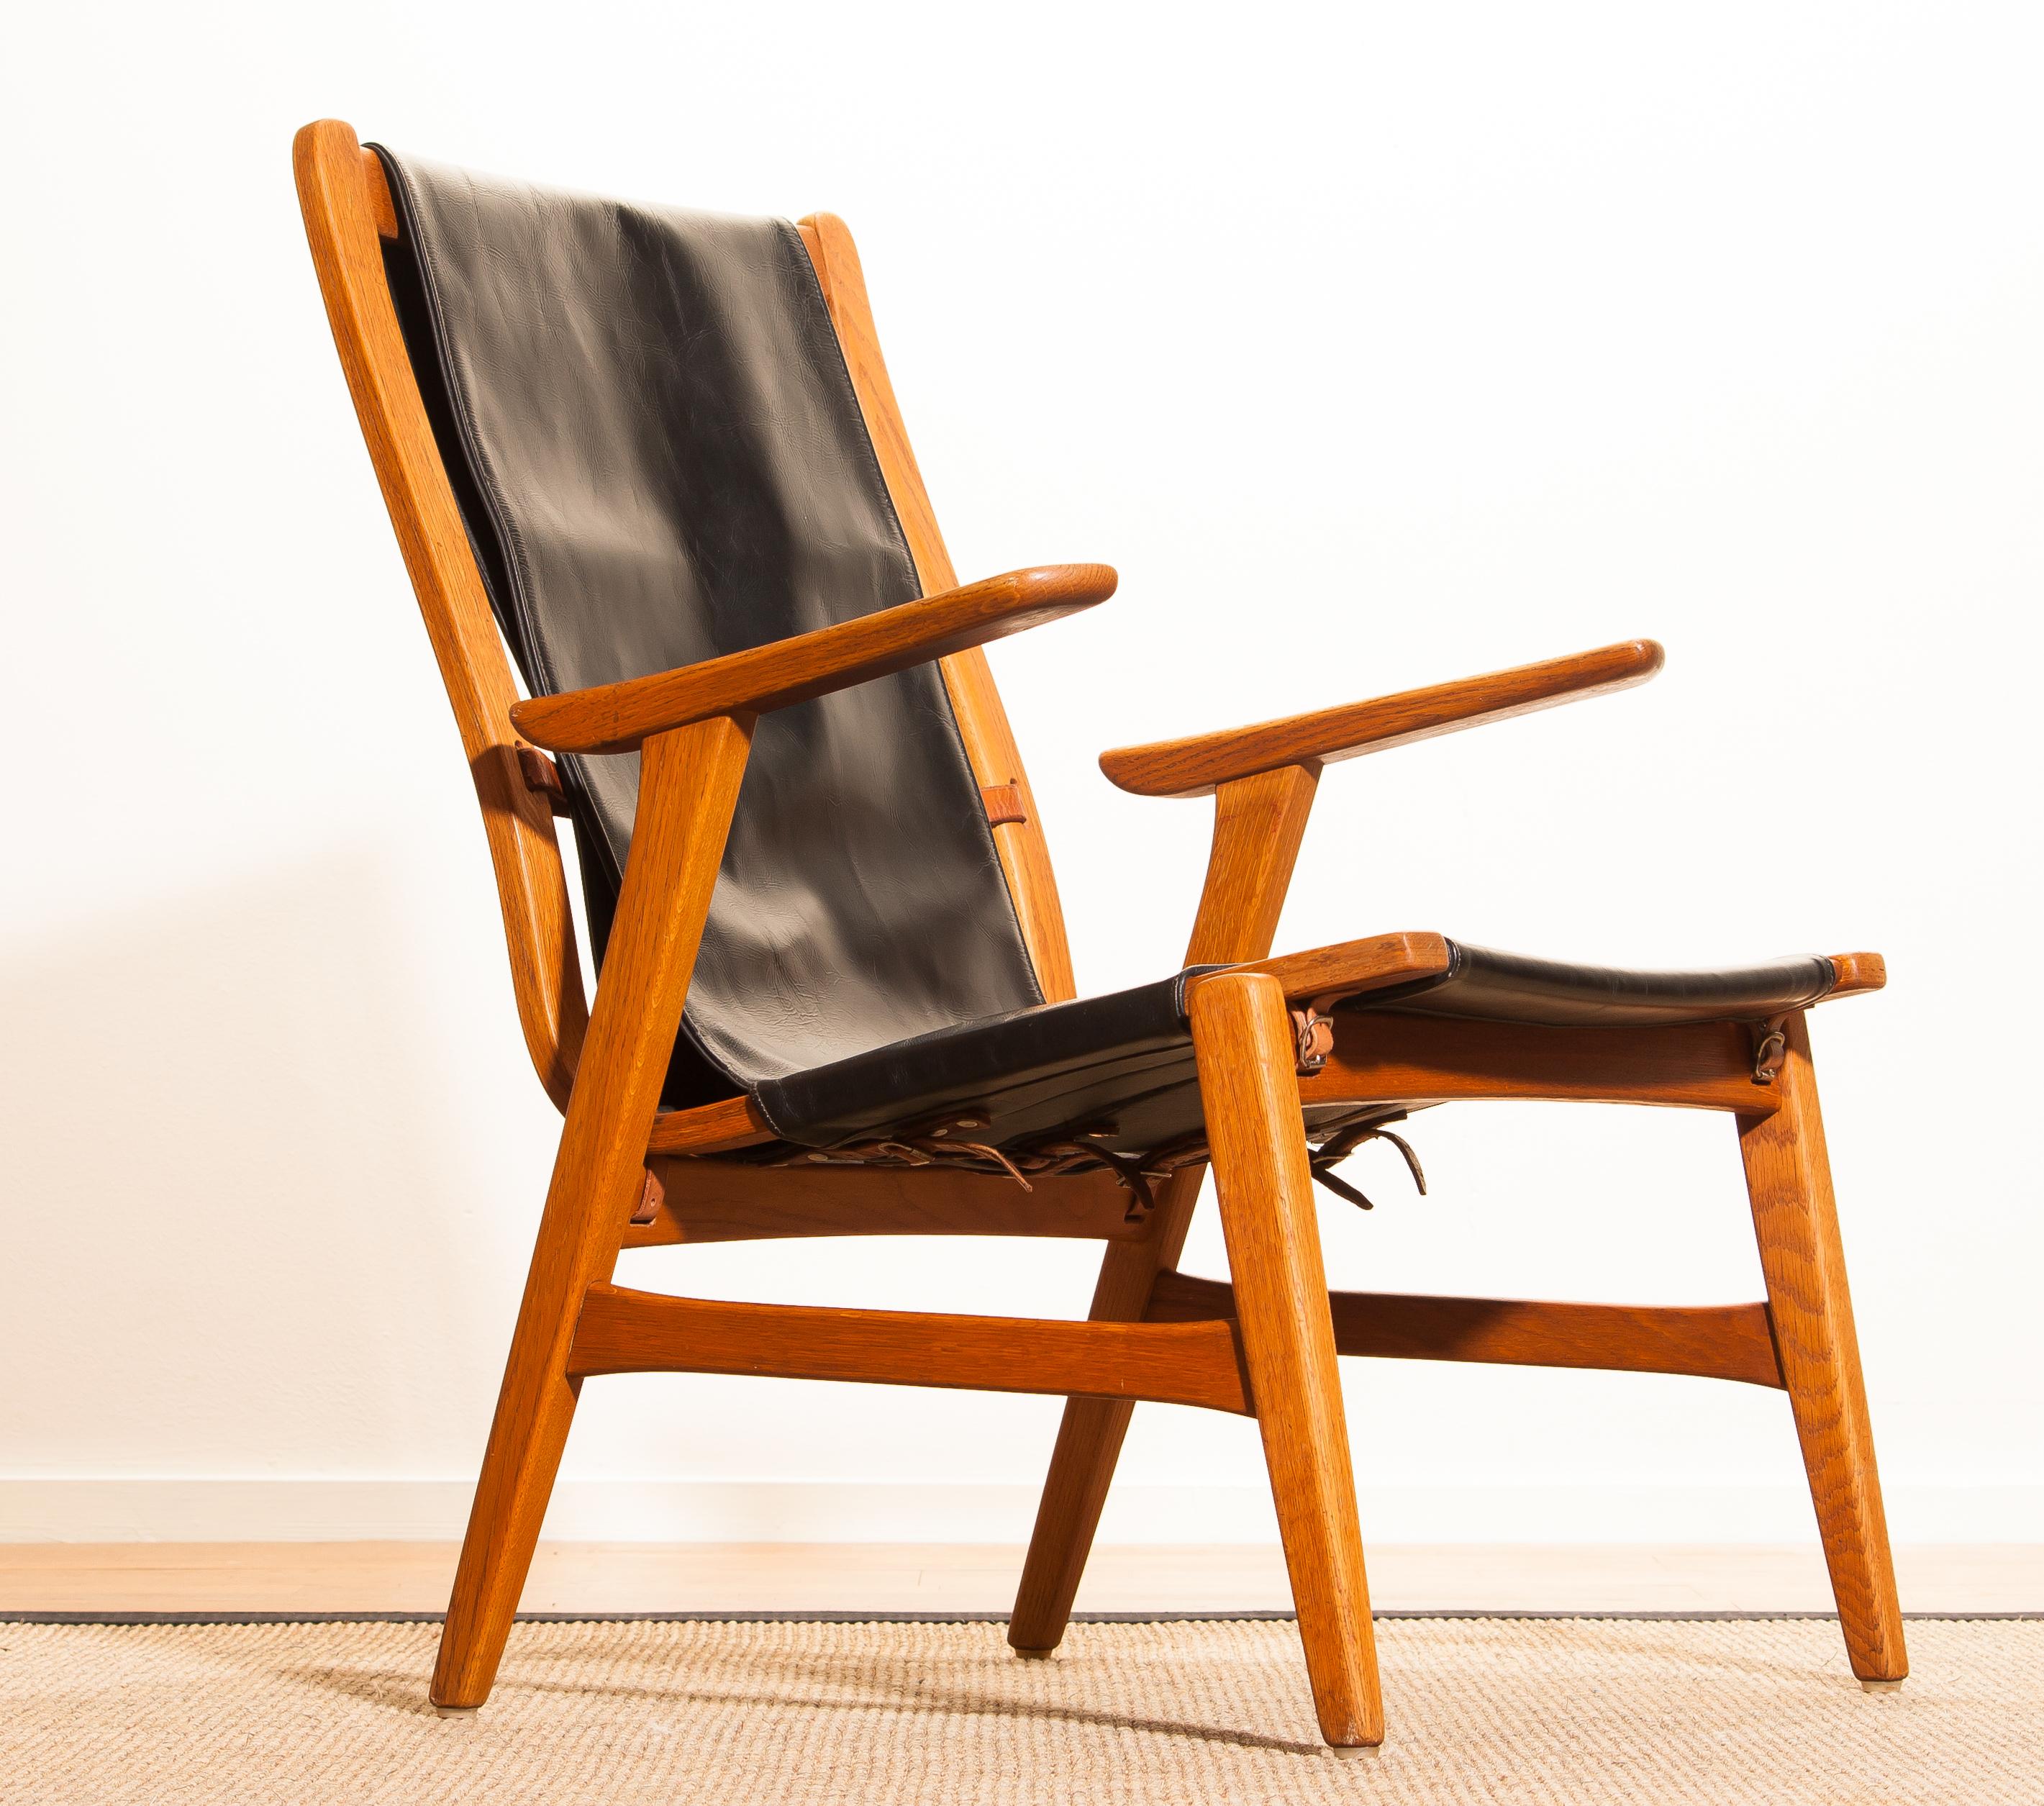 Wonderful hunting chair 'Ulrika' designed by Östen Kristansson for Vittsjö, Sweden.
This beautiful chair is made of an oak frame with a black leather seating.
It is in a very nice condition,
circa 1950s.
Dimensions: H 82 cm, W 62 cm, D 60 cm, SH